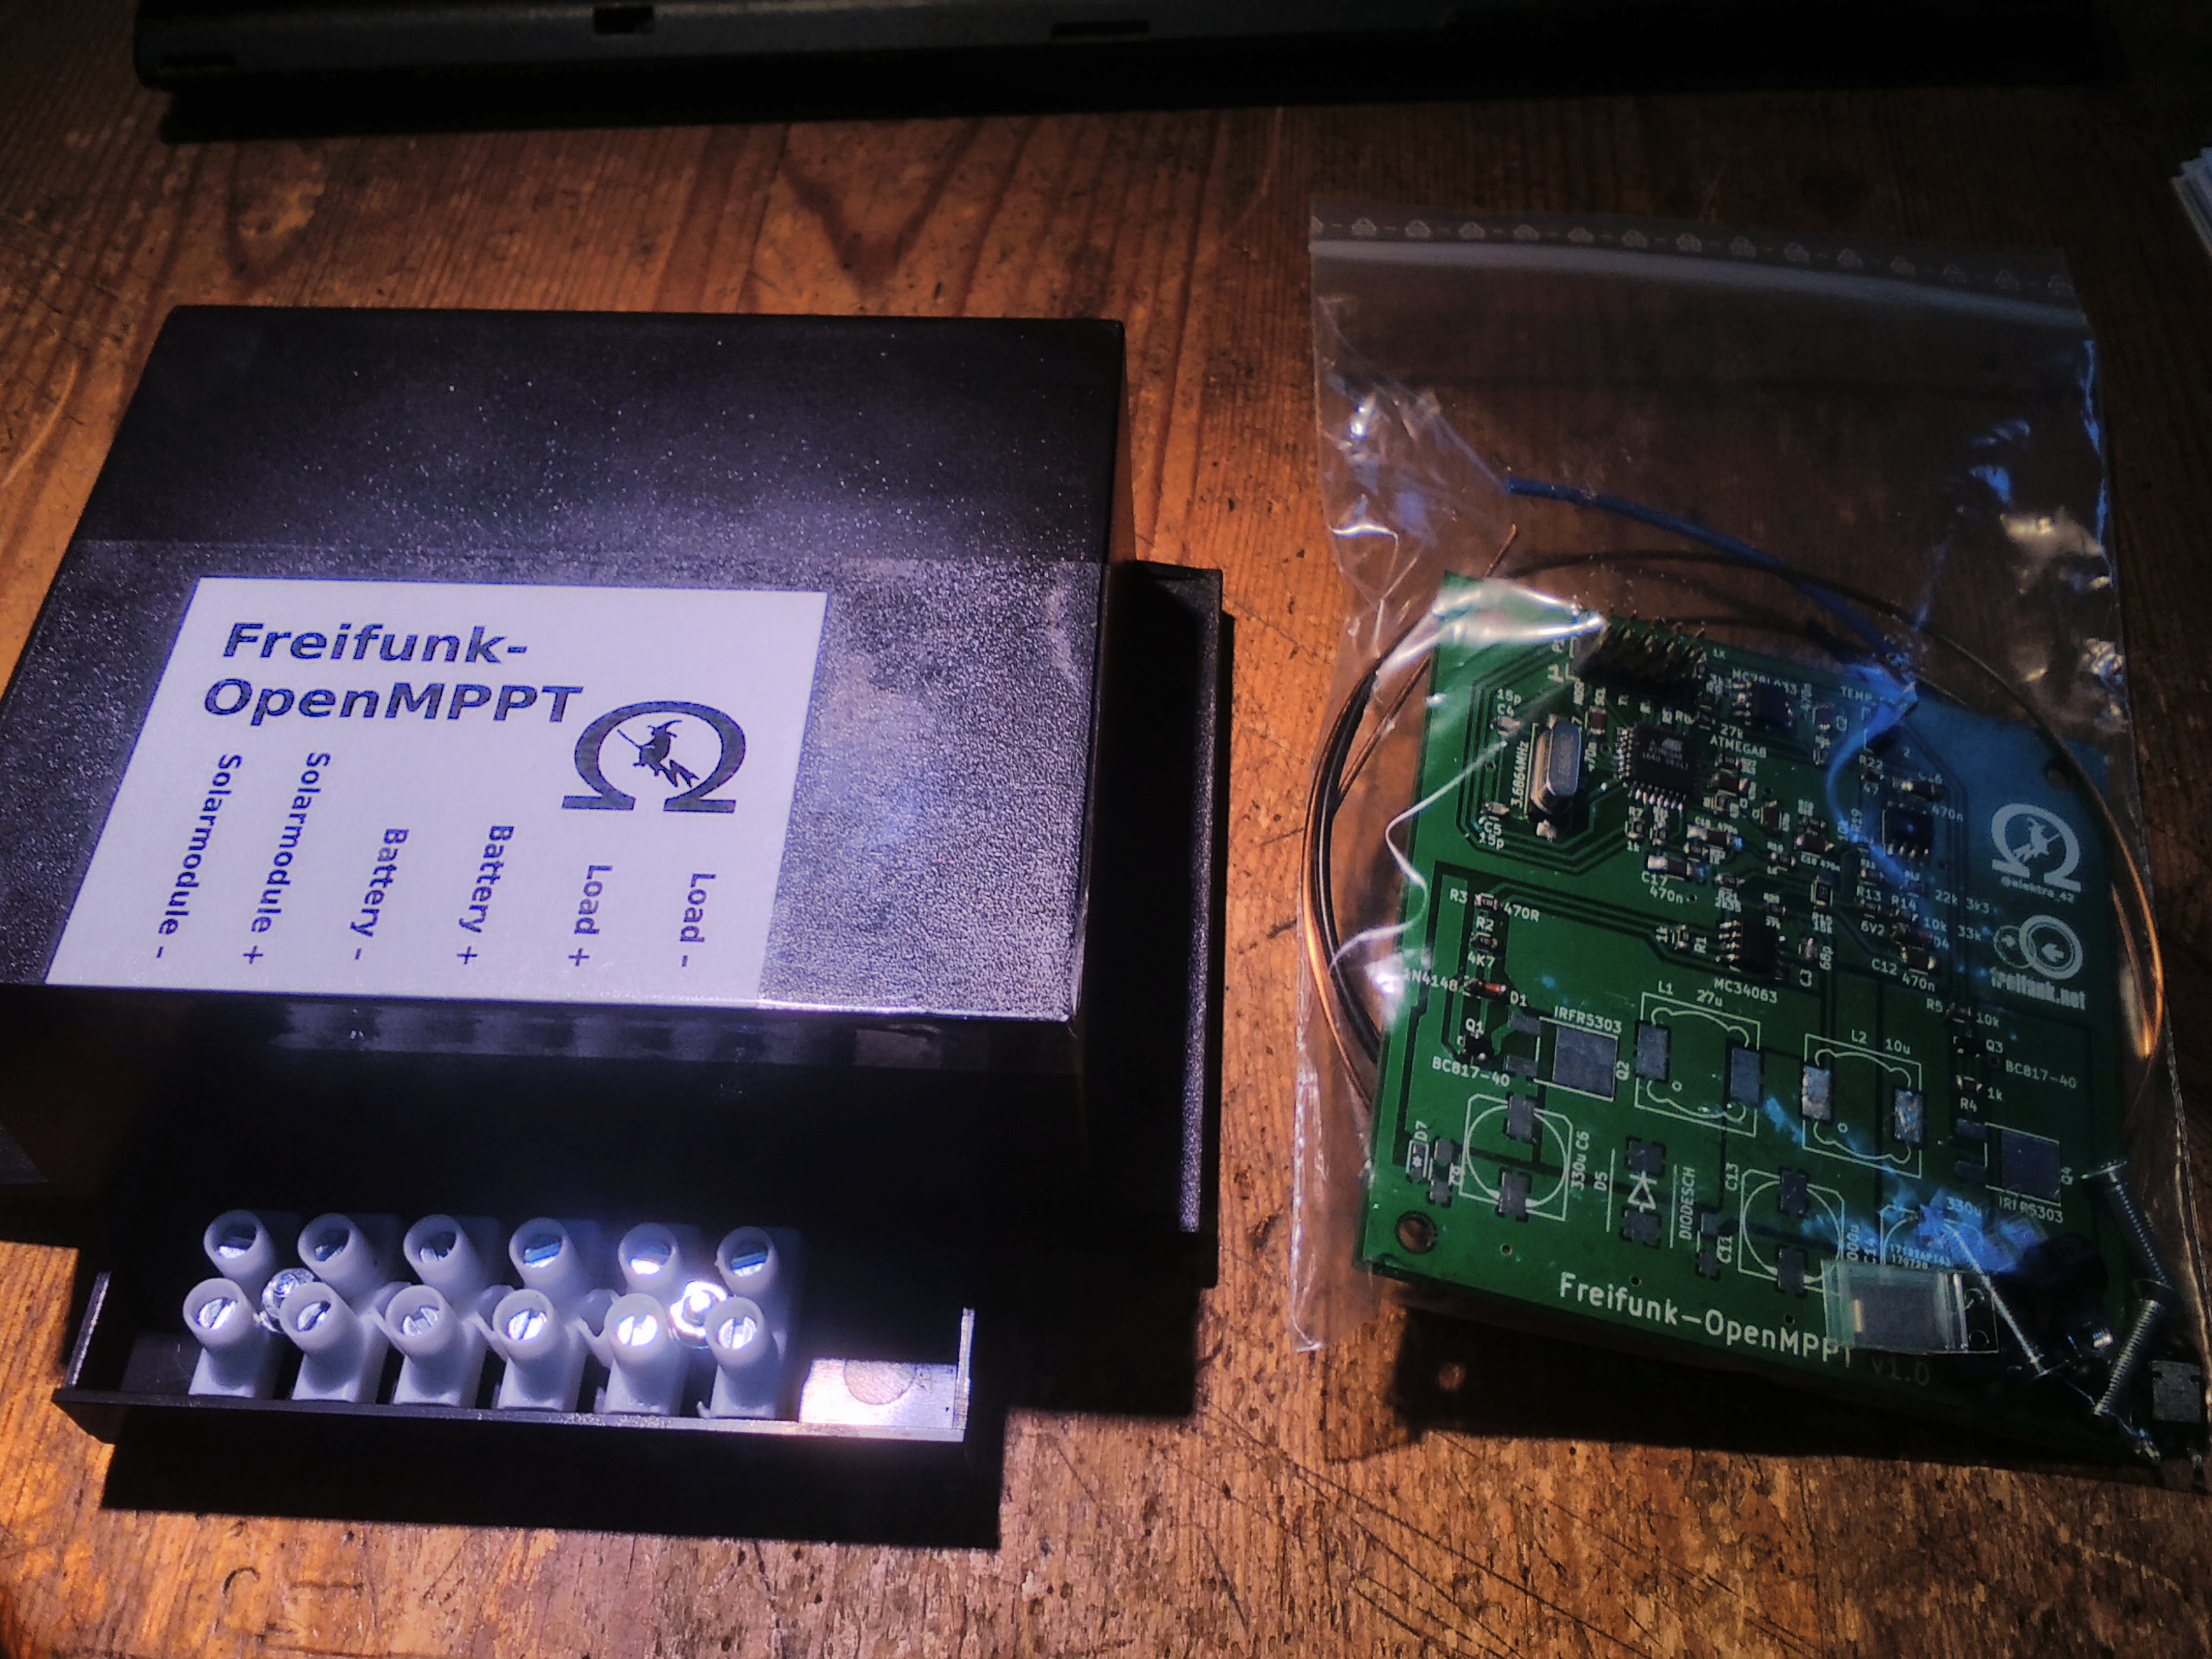 Freifunk-OpenMPPT as finished device and kit